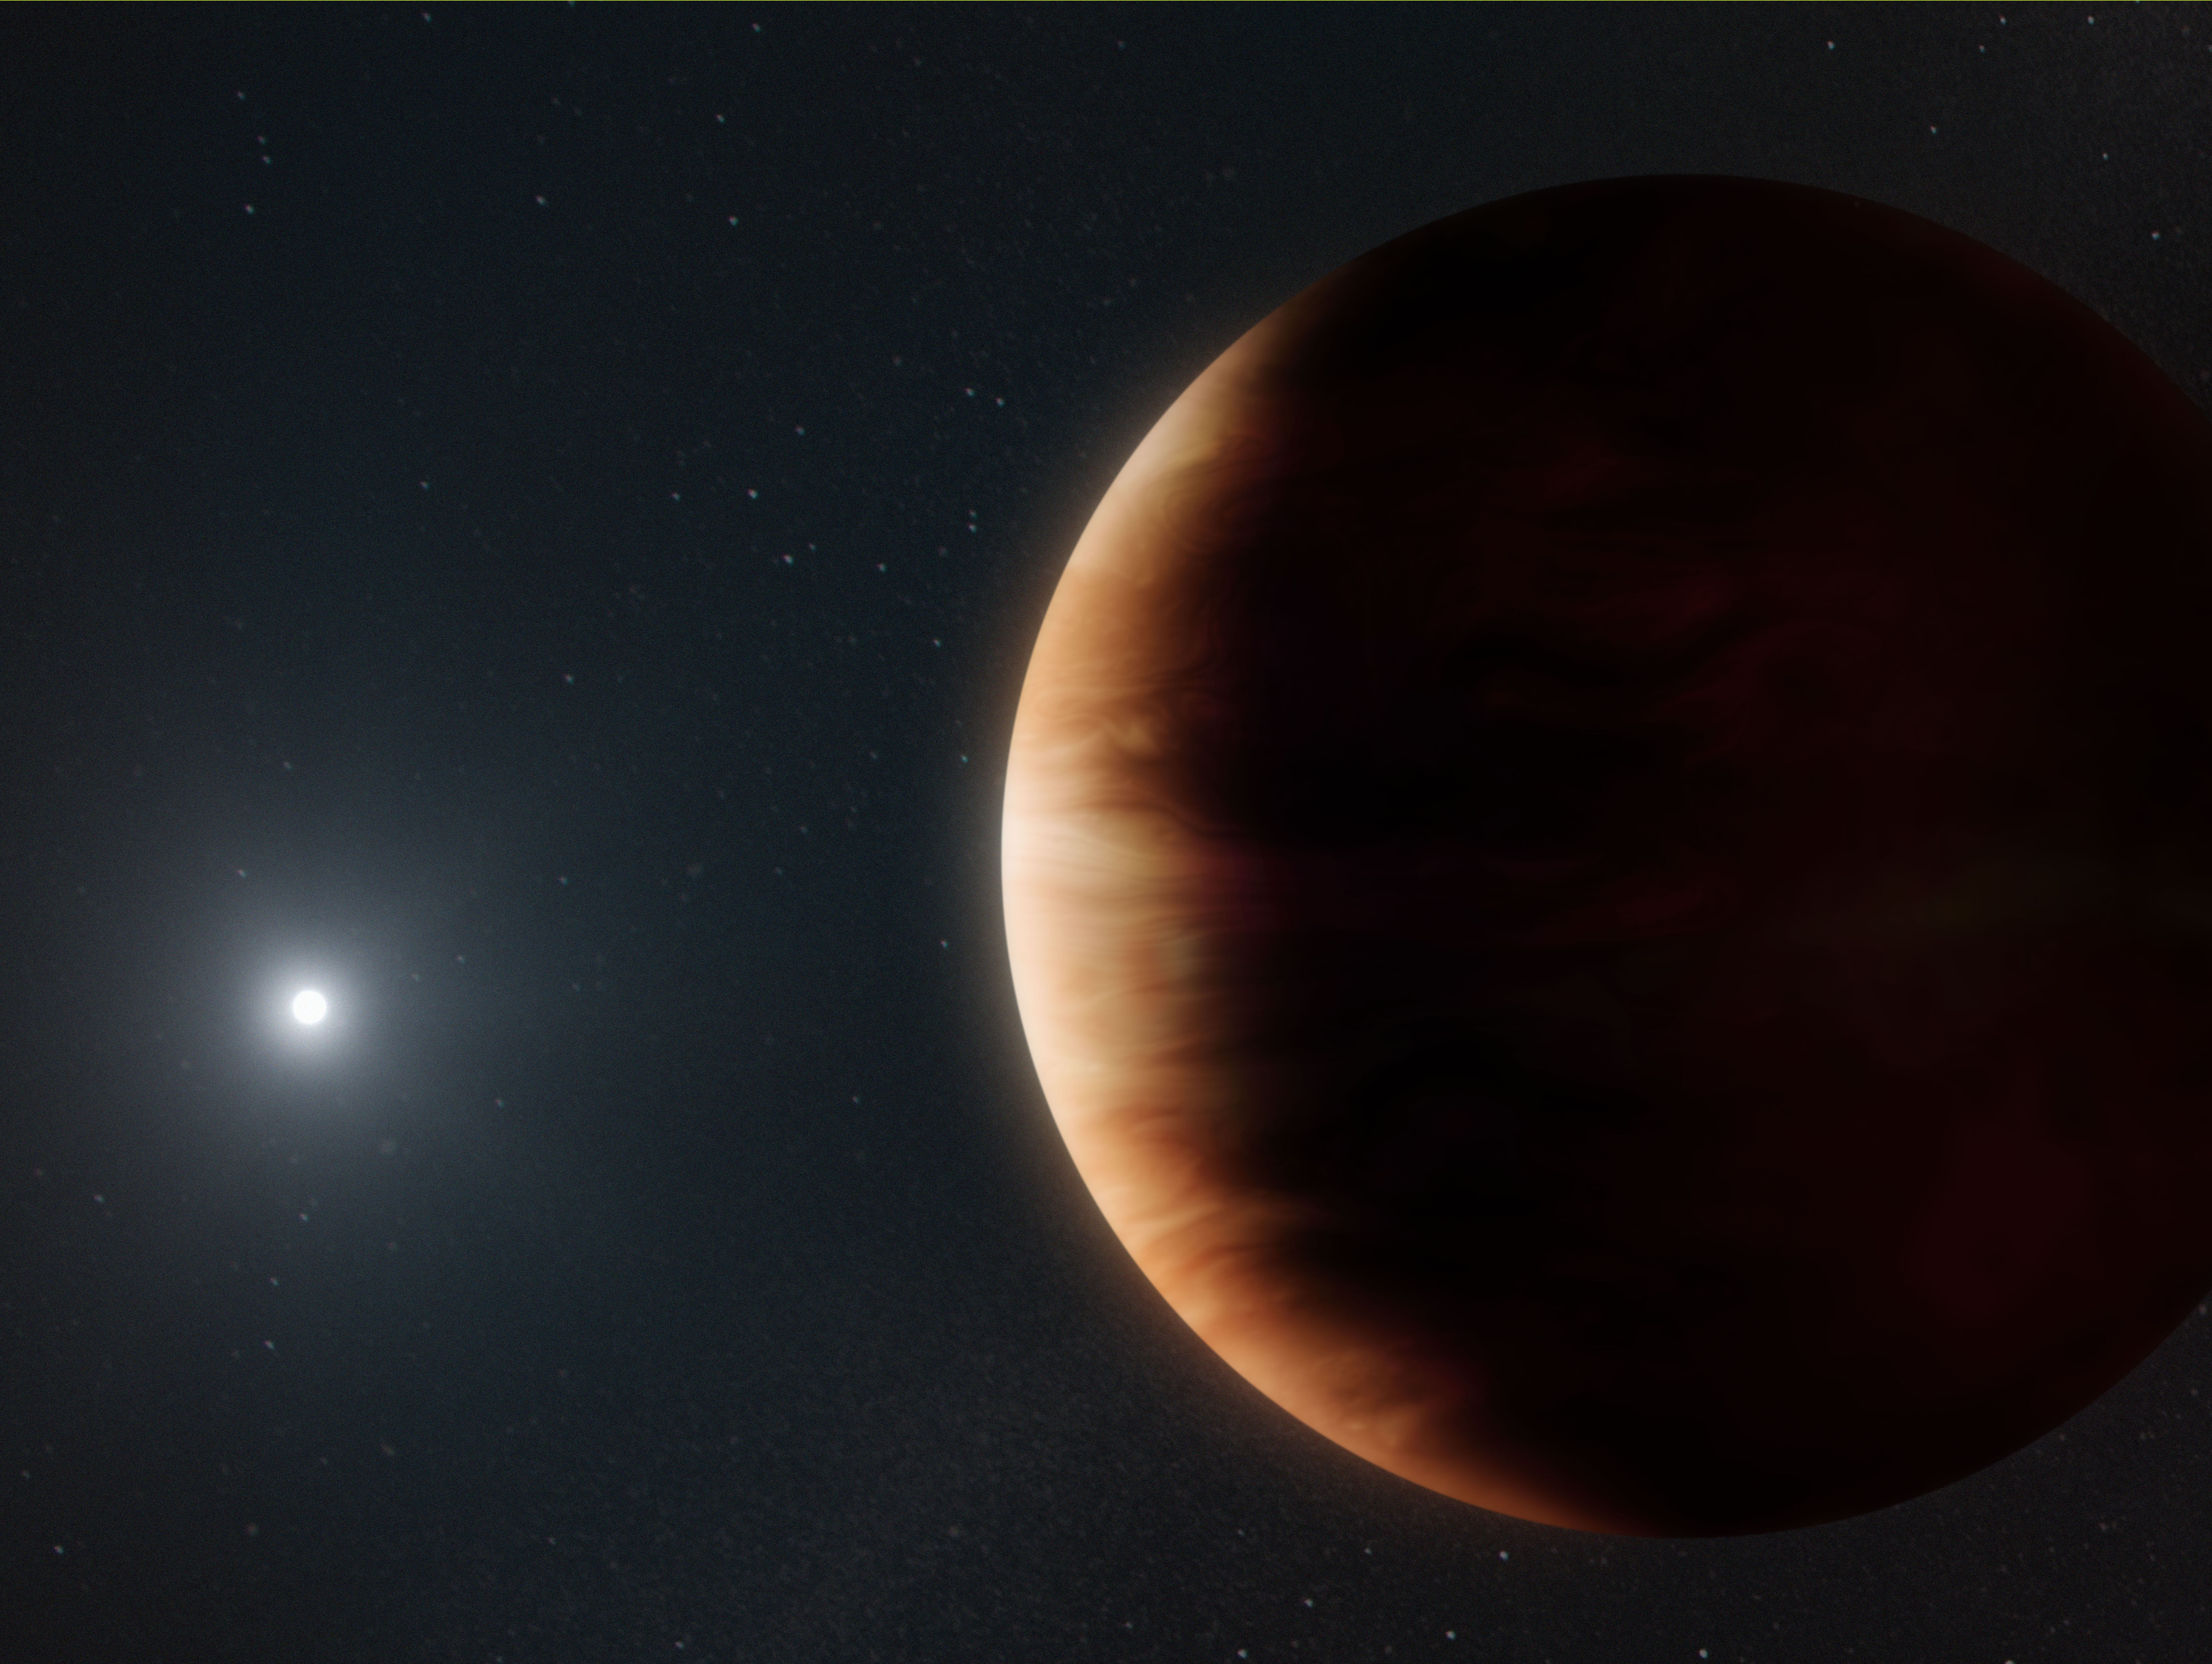 Planets orbiting from a sufficient distance can continue to exist after their star dies. New evidence gathered from a solar system like our own (depicted in this artist’s rendering) suggests that Jupiter and Saturn might survive the Sun’s red giant phase—when it burns the last of its nuclear fuel and collapses some 5 billion years from now. Credit:W. M. Keck Observatory/Adam MakarenkoFile. Click image to download hi-res version.